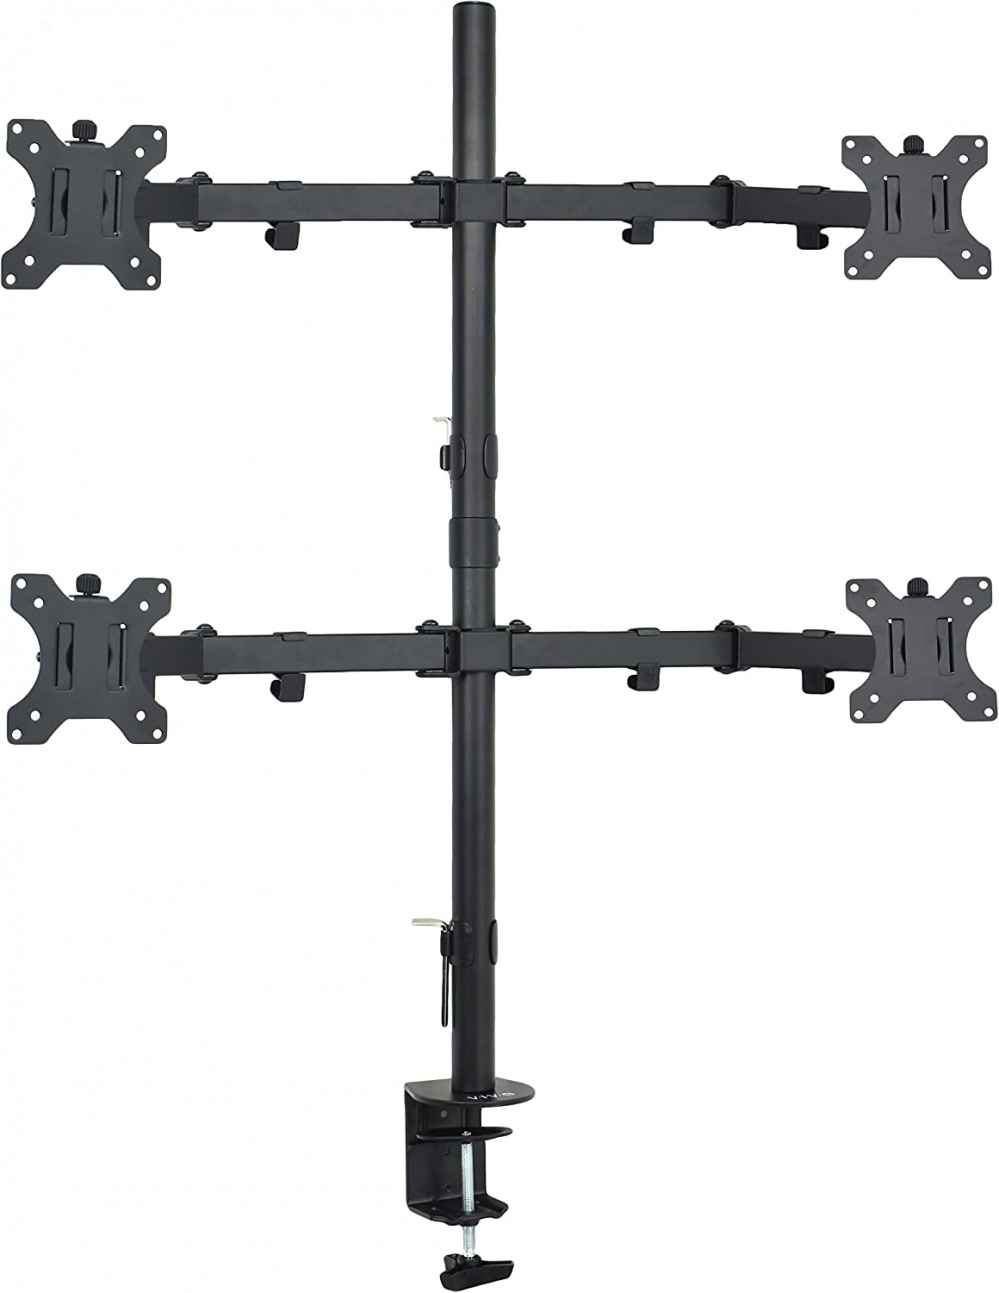 VIVO Quad 13 to 30 inch LCD Monitor Desk Mount, Fully Adjustable Stand Black 